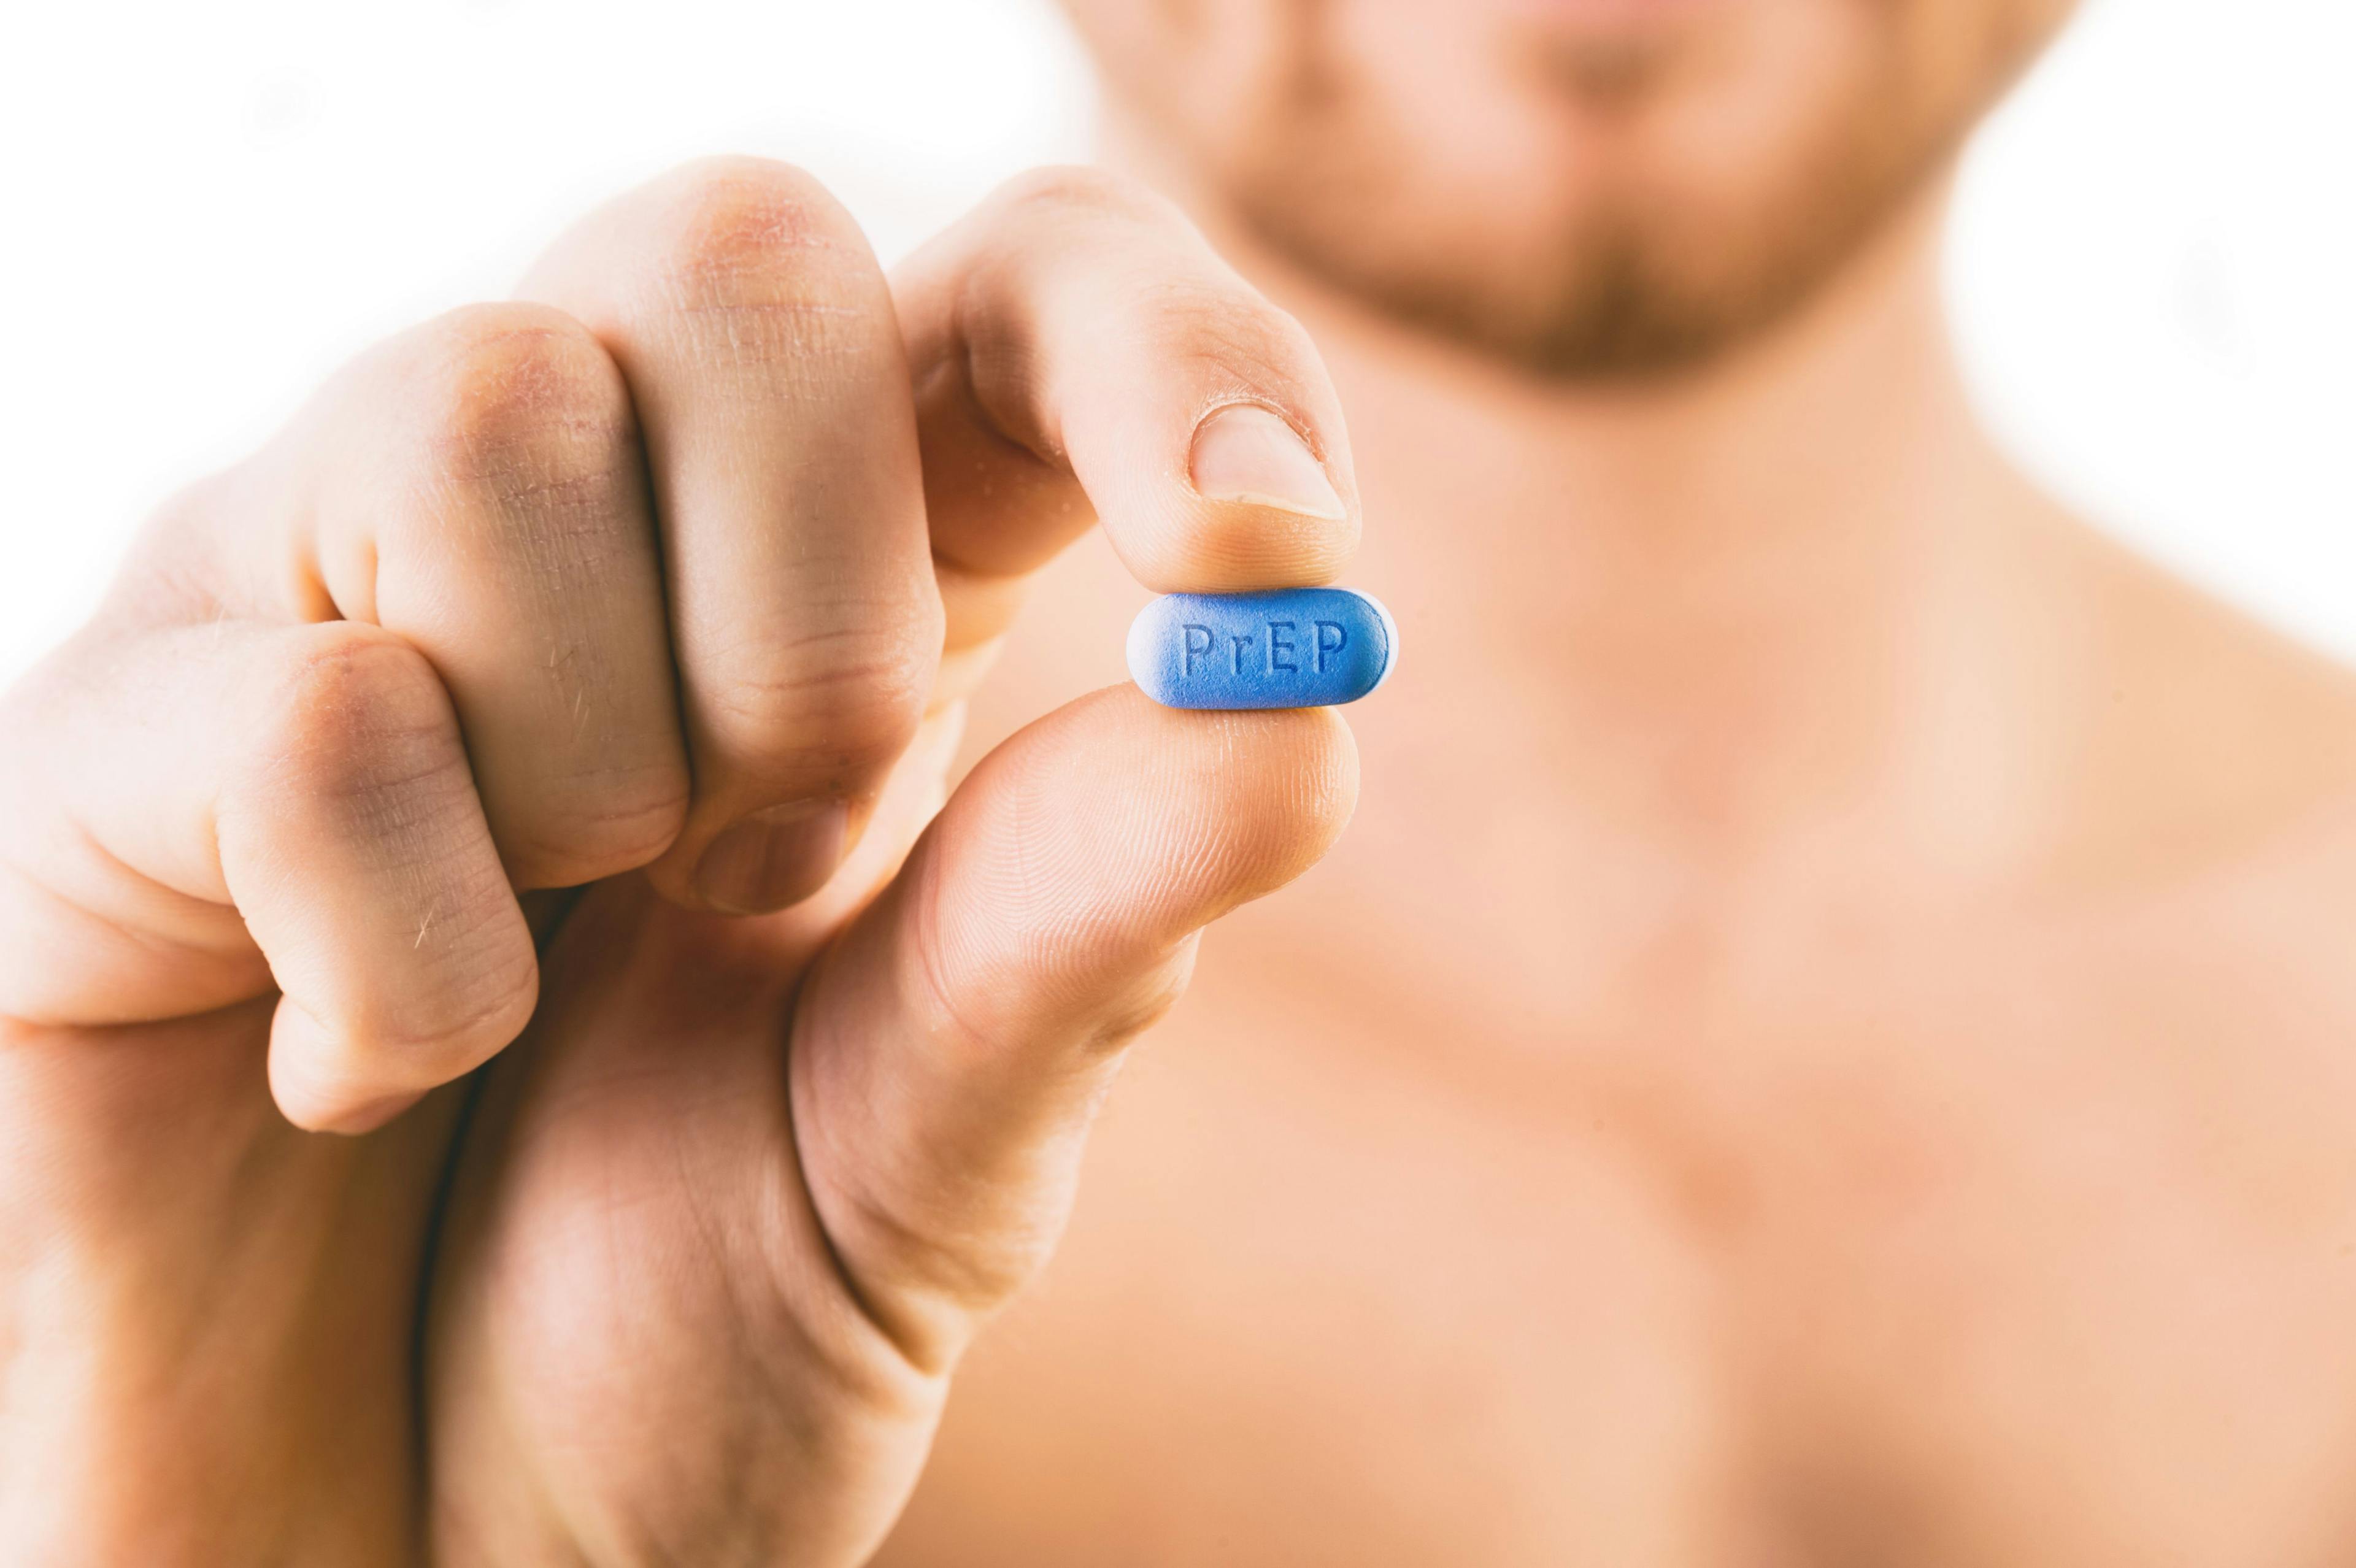 Man holding a pill used for Pre-Exposure Prophylaxis (PrEP)